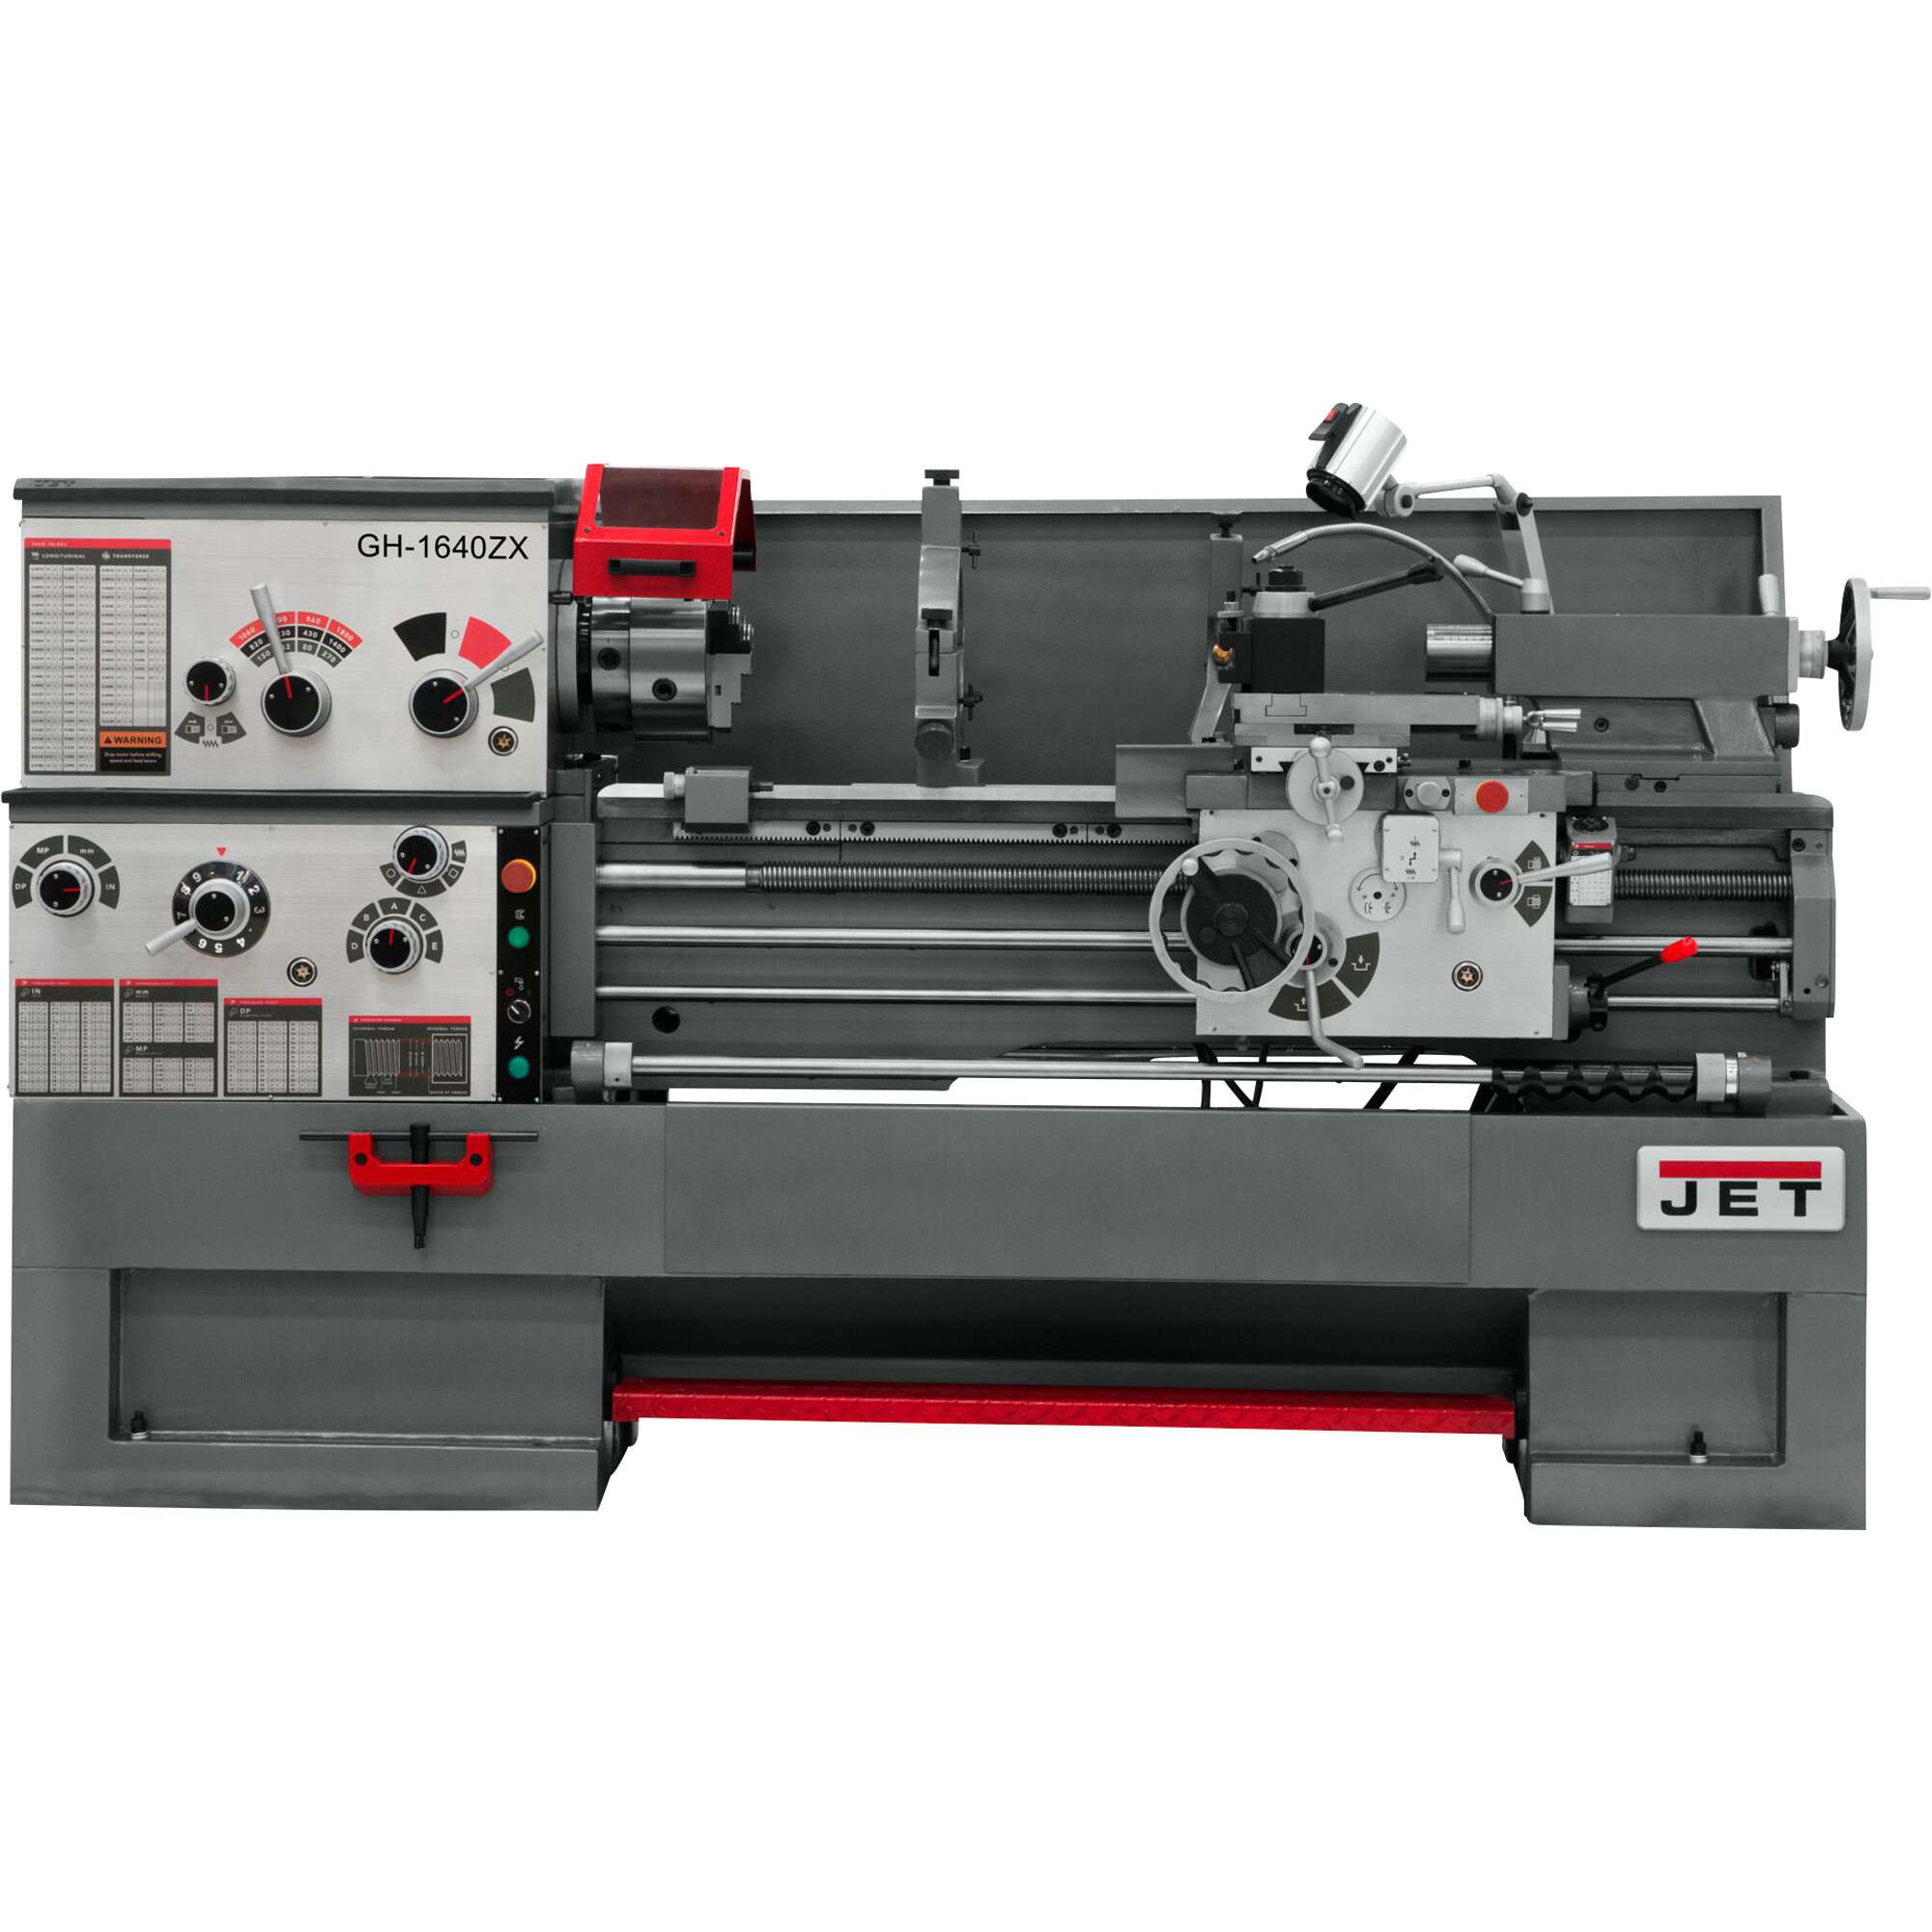 JET ZX-Series Large Spindle Bore Lathe with Acu Rite 200S DRO 16in x 40in